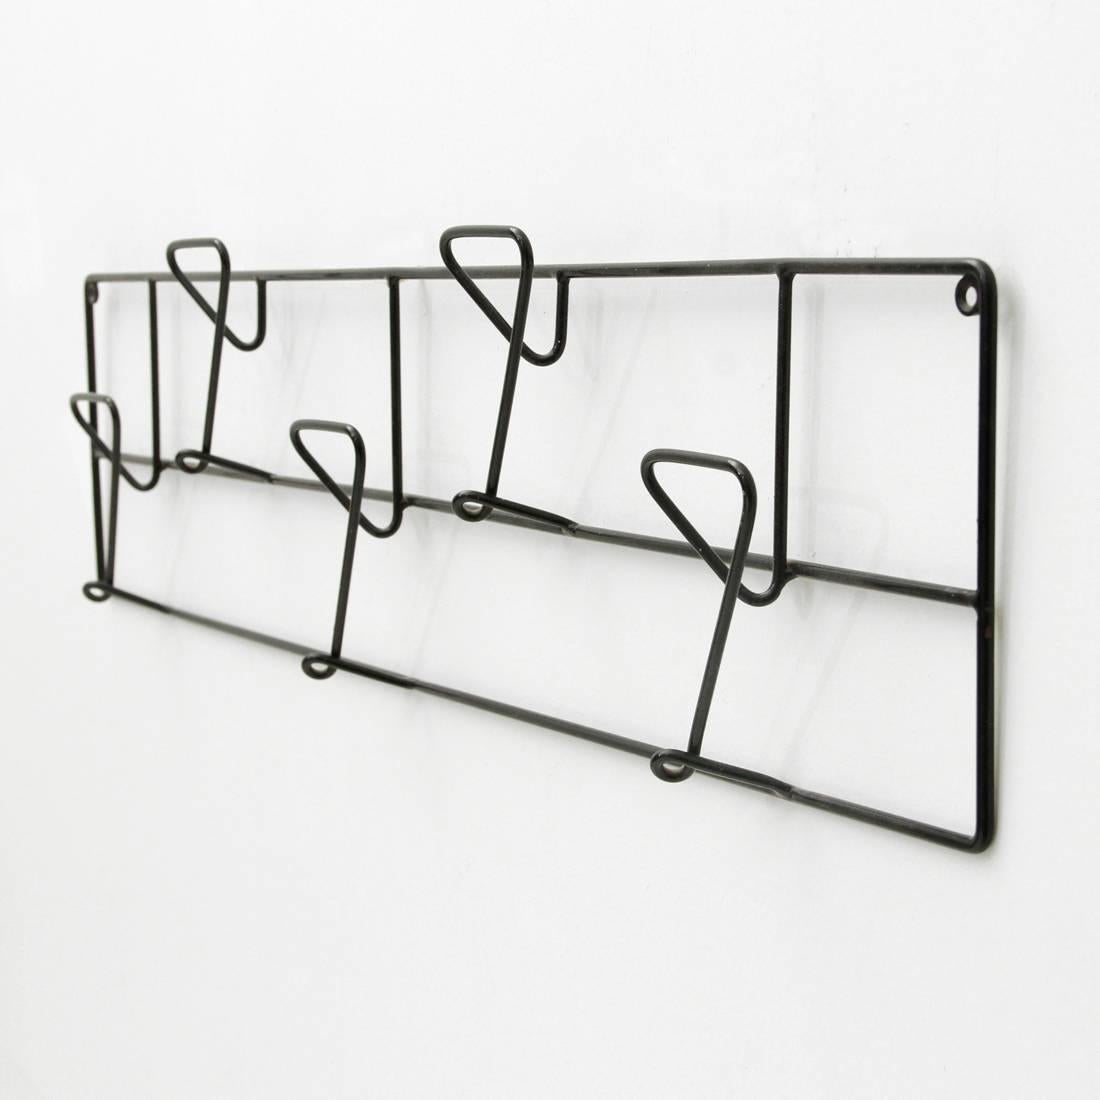 Coat hanger of Italian manufacture produced in the 1950s.
Structure and hooks in black painted metal rod.
Good general conditions, some signs due to normal use over time.

Dimensions: Weight 90, height 21, depth 5.
 